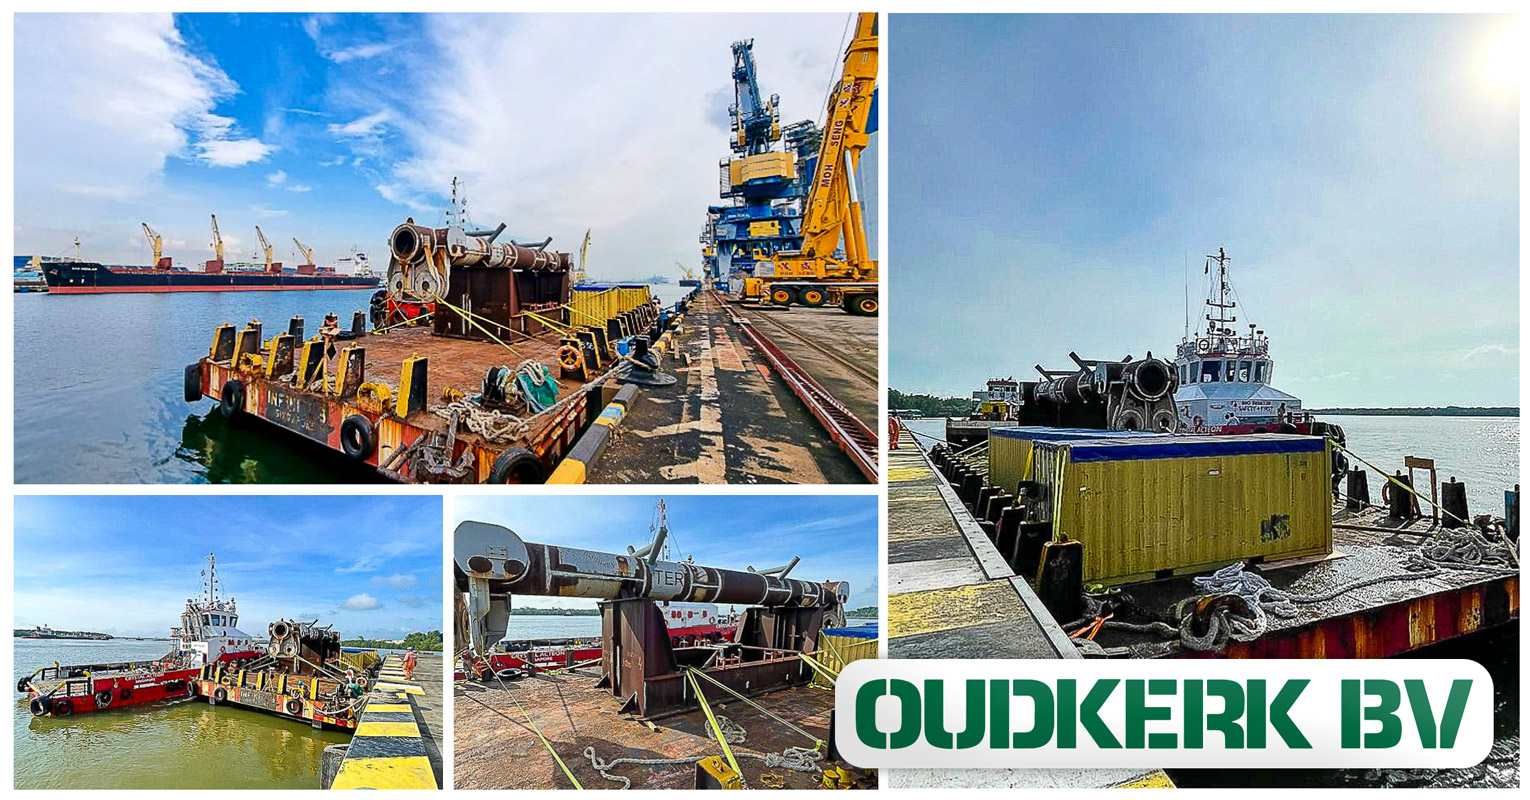 Oudkerk Logistics Handling a Spreader Bar and 2 Containers via Barge from Singapore to Kuching